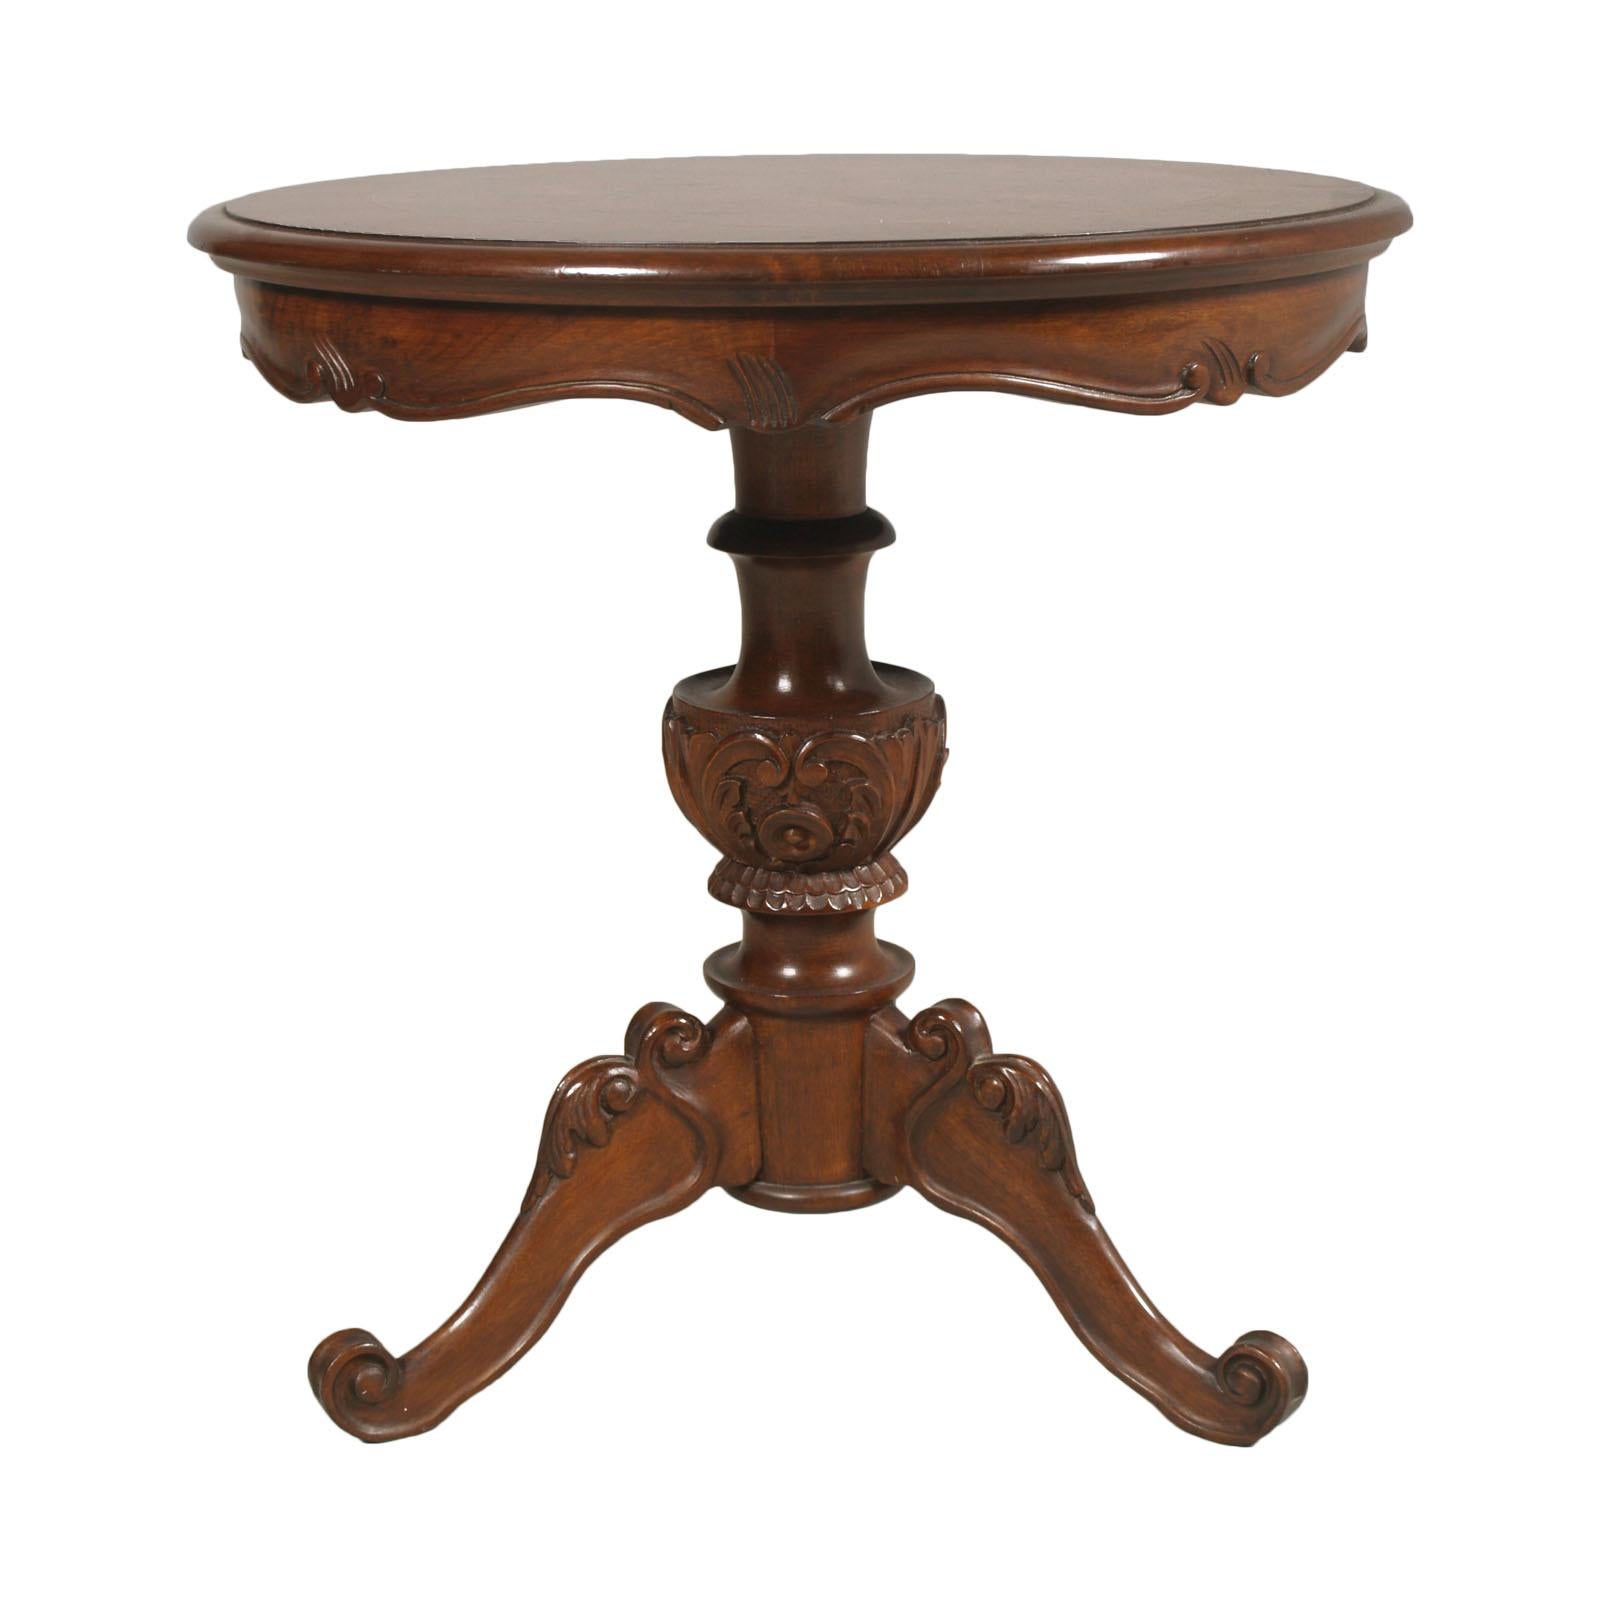 Italy 1920s very elegant and graceful Baroque revival round centre table or coffee table, in solid hand carved walnut, with the top in burl walnut with inlay. Polished with wax.

Measures cm: Height 53, diameter 53.